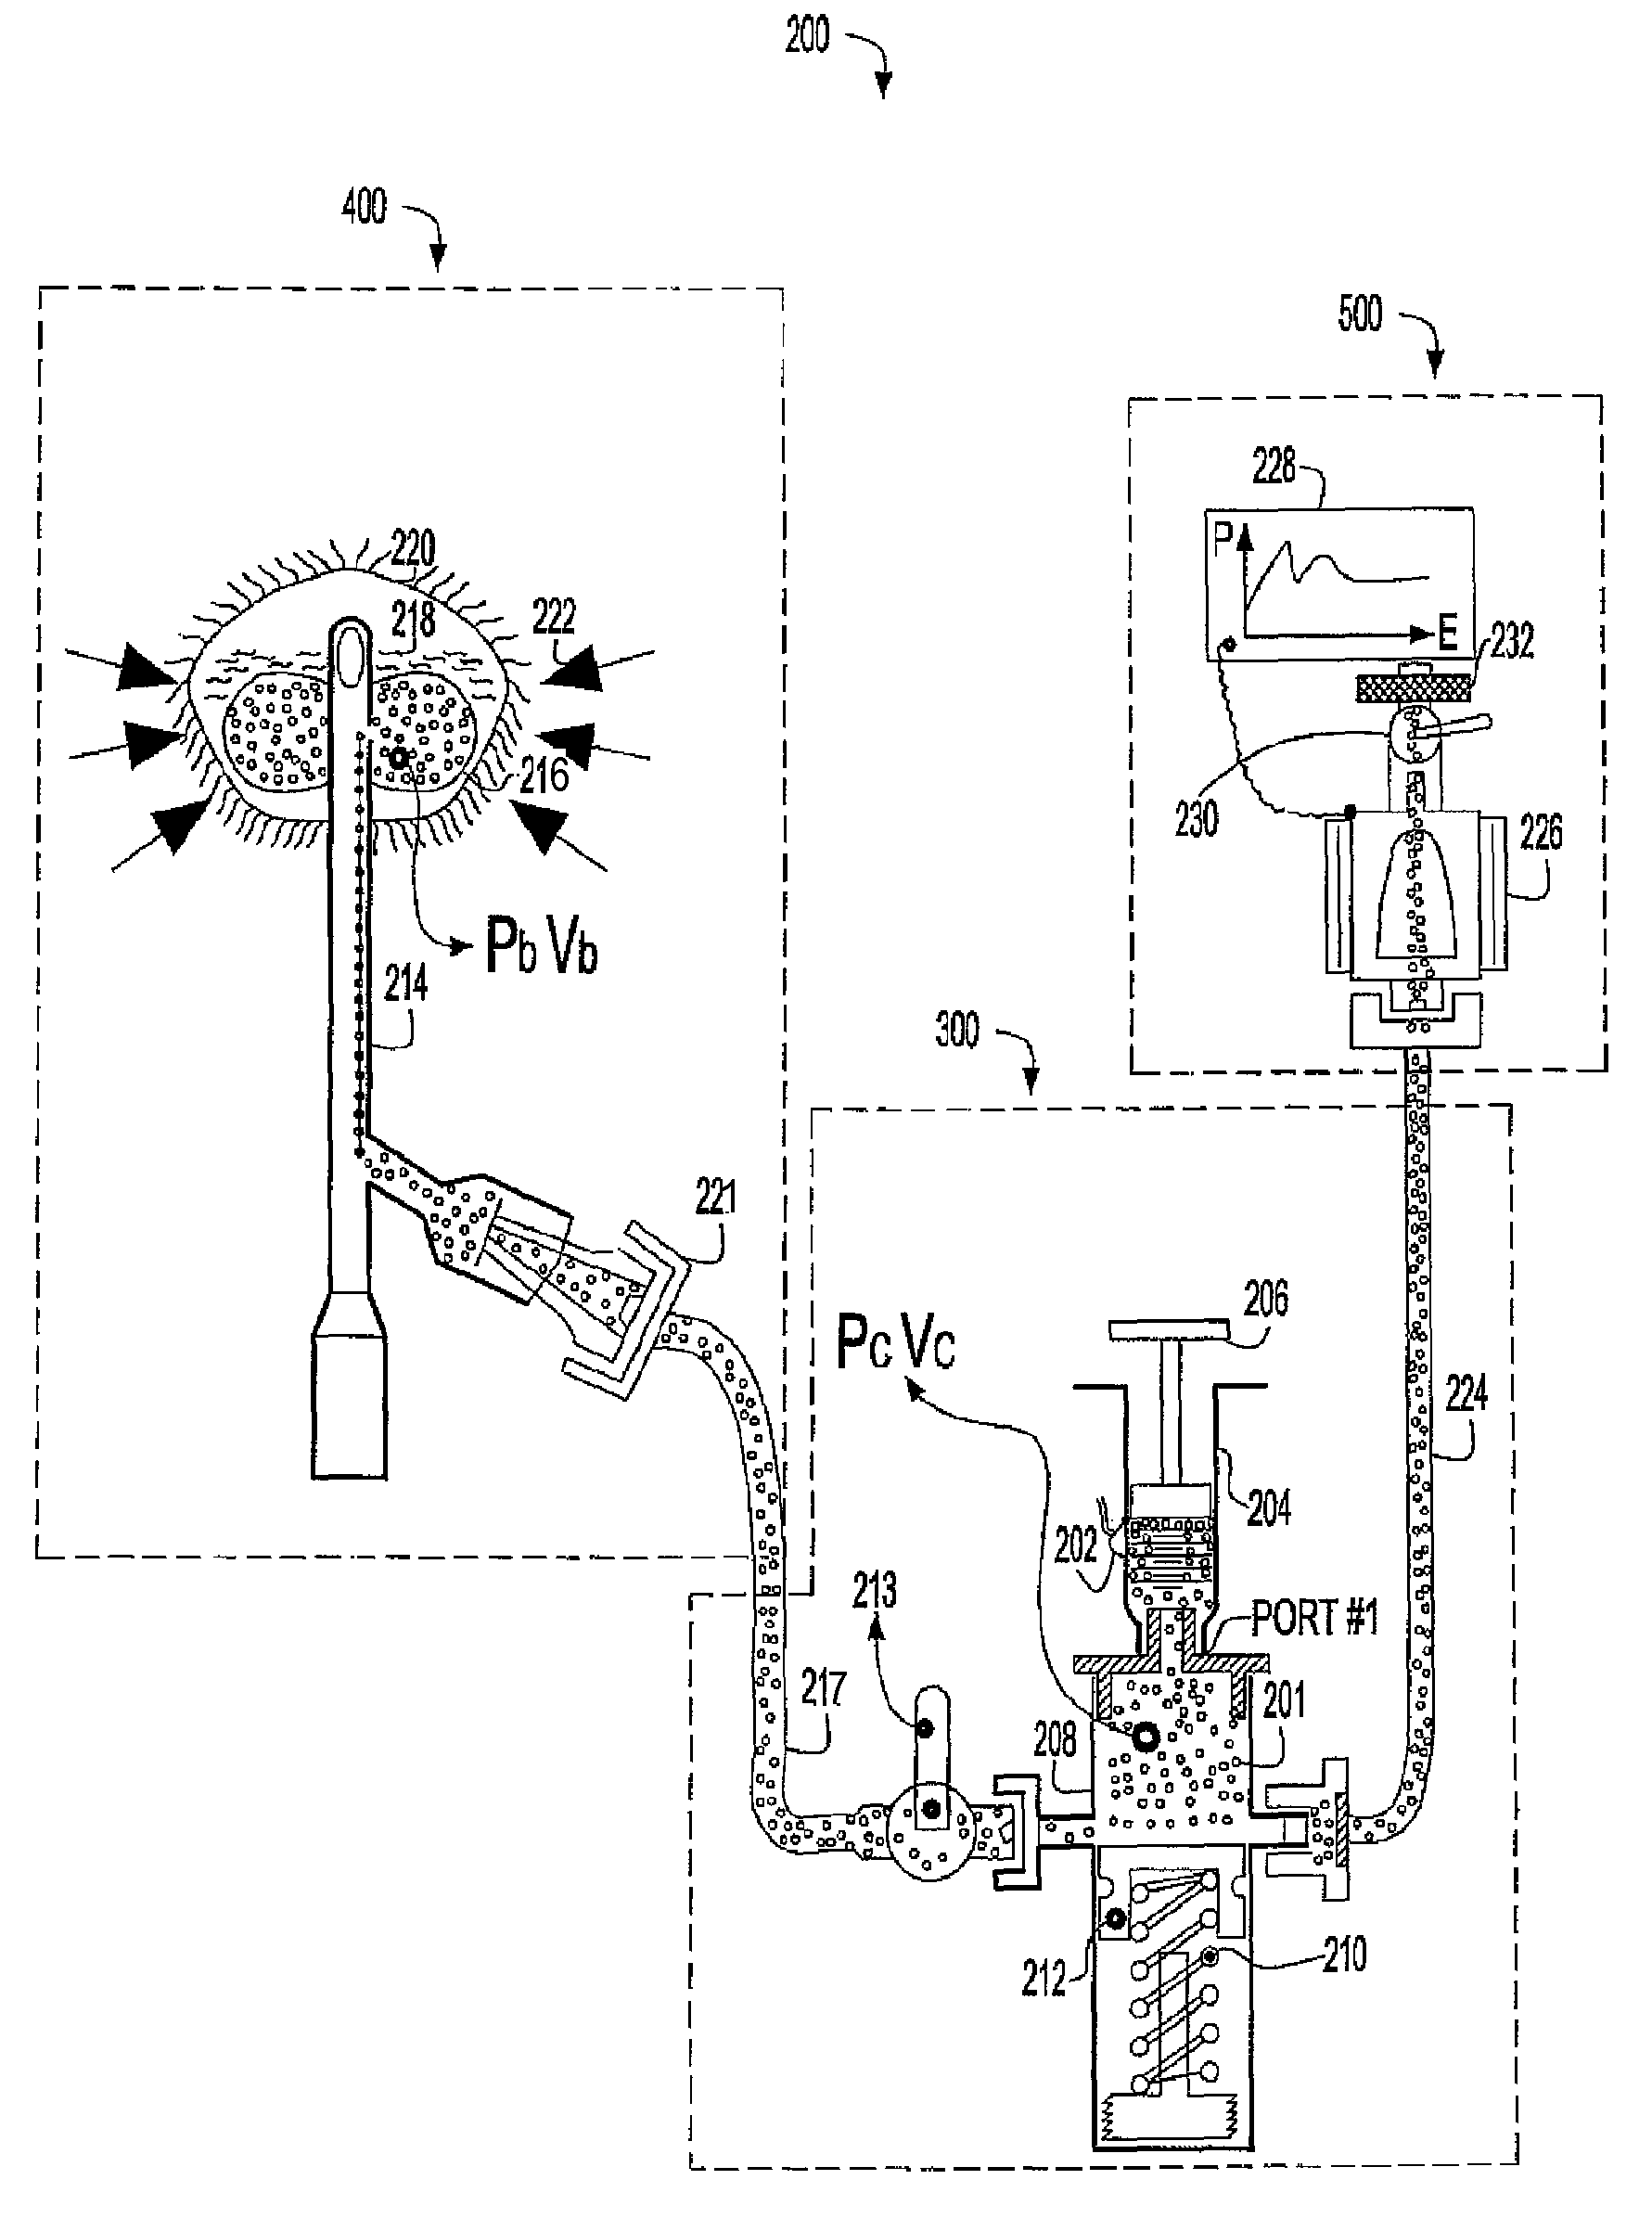 Continuous intra-abdominal pressure monitoring system